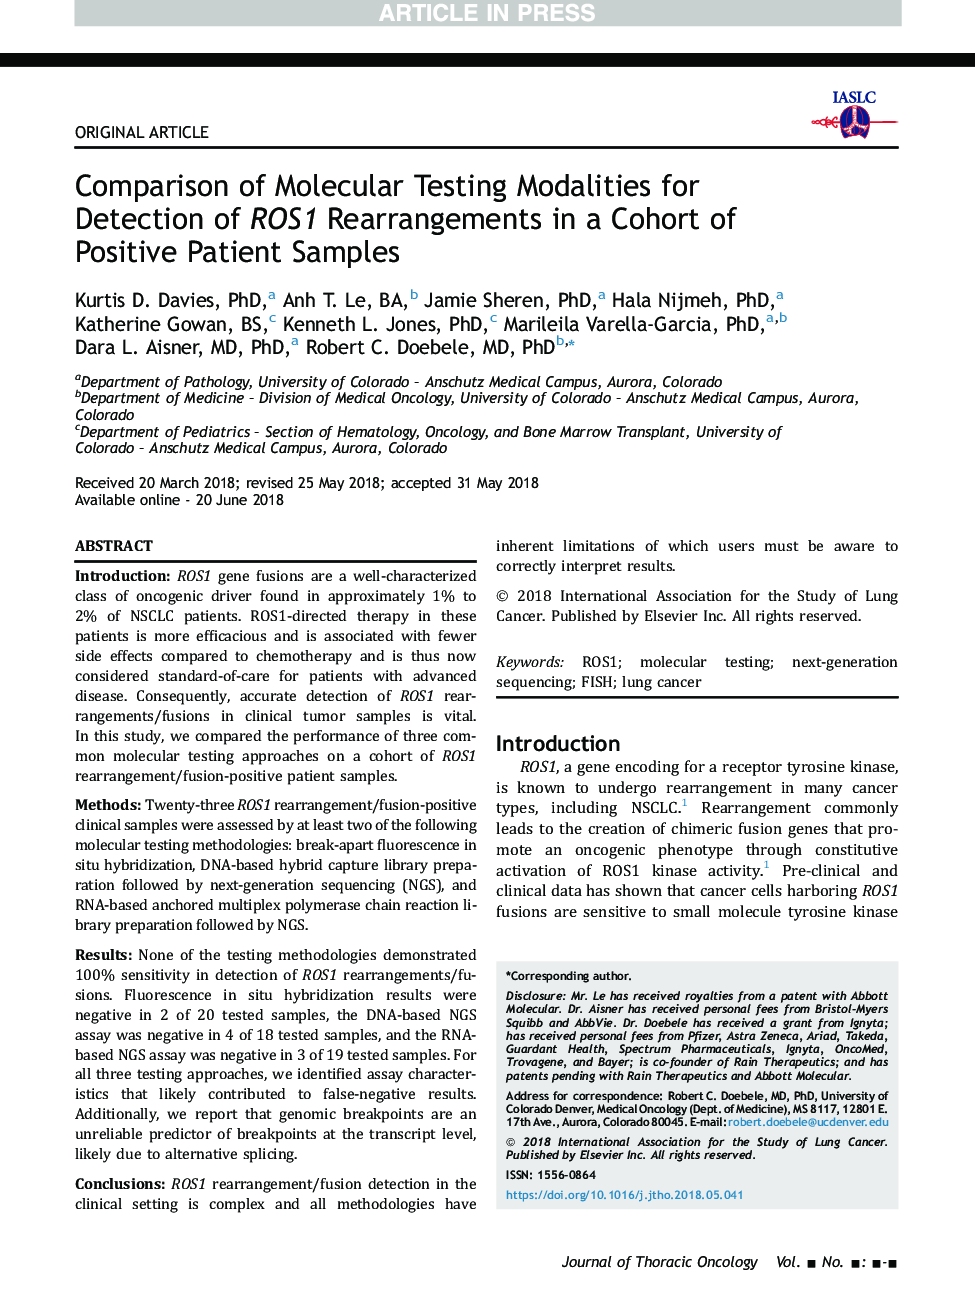 Comparison of Molecular Testing Modalities for Detection of ROS1 Rearrangements in a Cohort of Positive Patient Samples